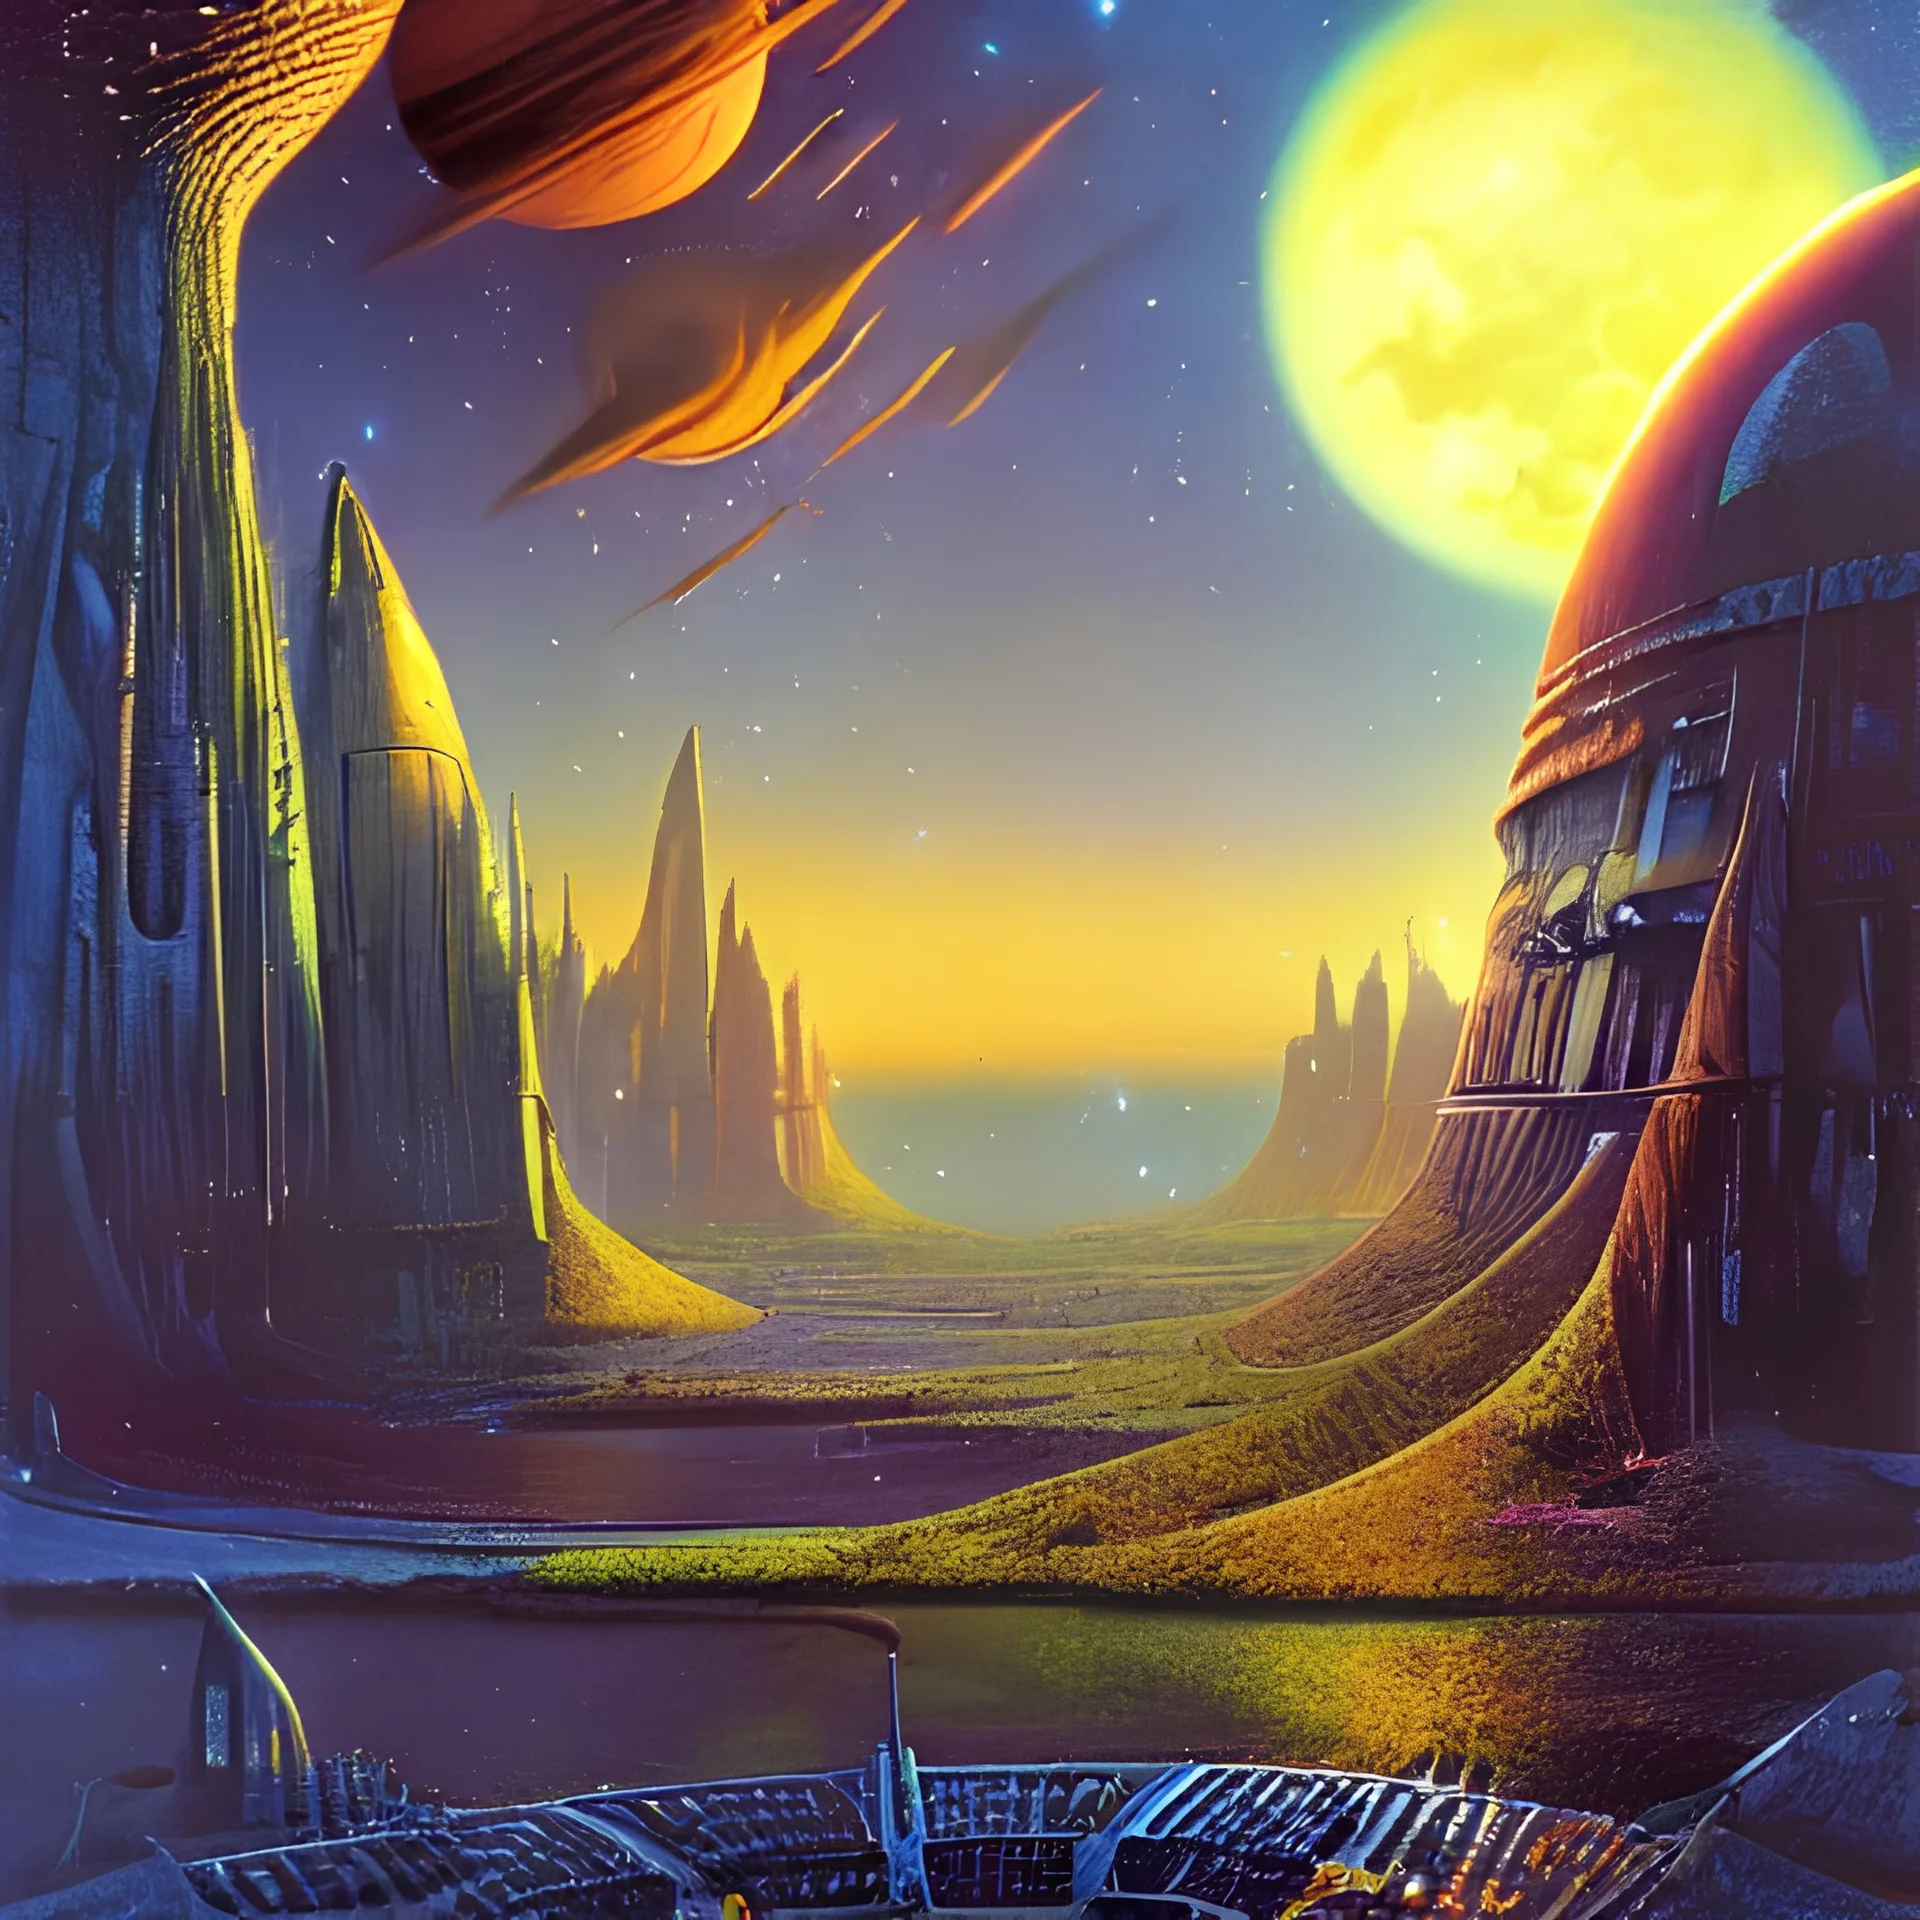 A fantastic space city by Bob Eggleton and by Ralph McQuarrie and by Roger Dean and by Paul Lehr.